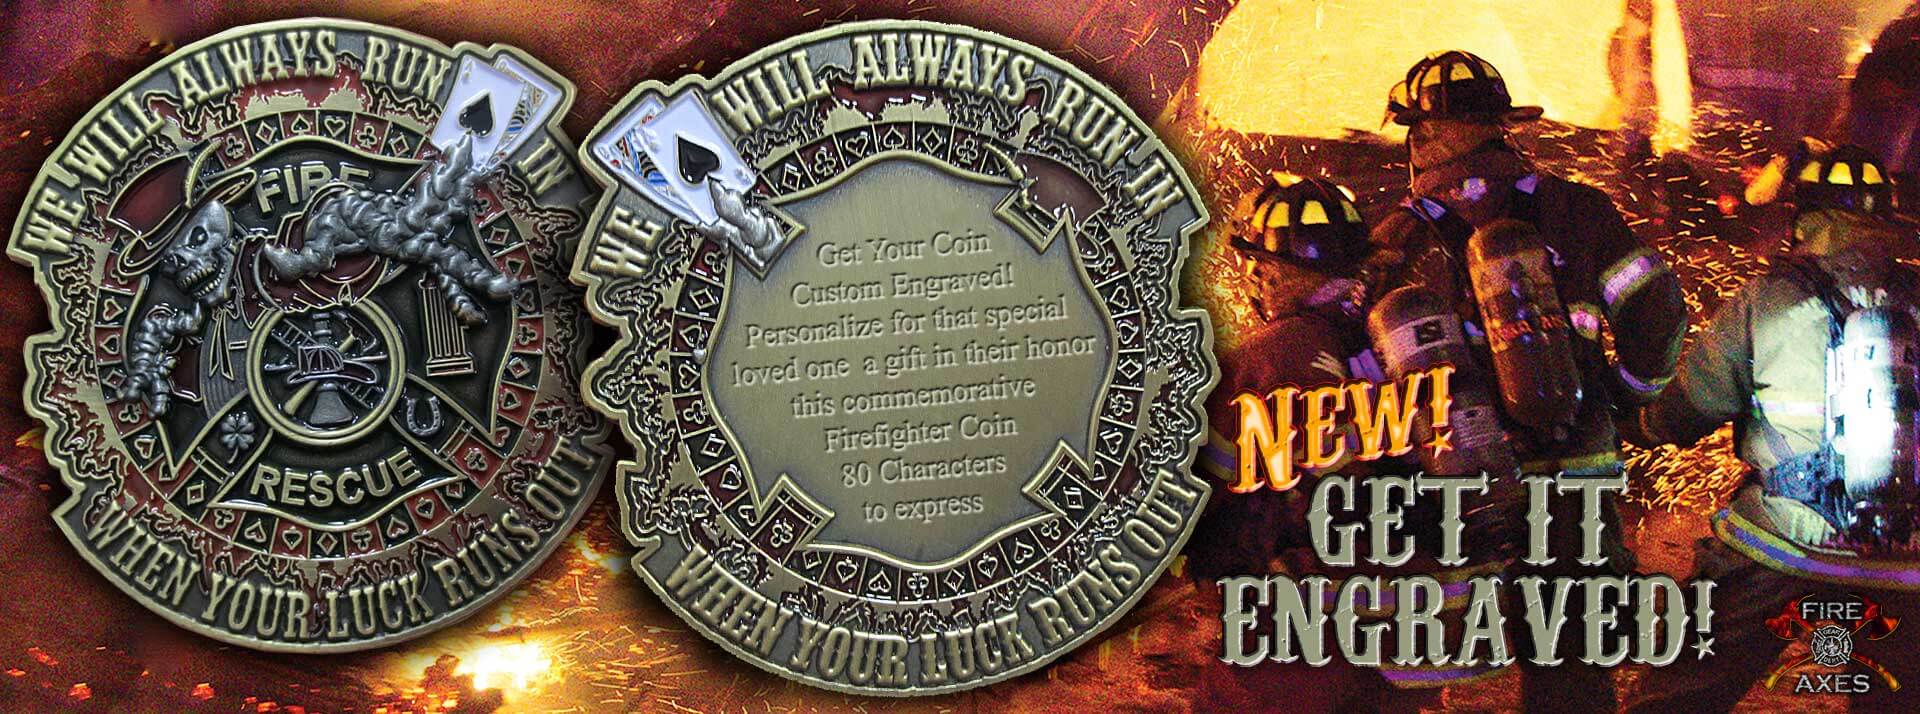 Luck runs out Custom Engraved challenge coin